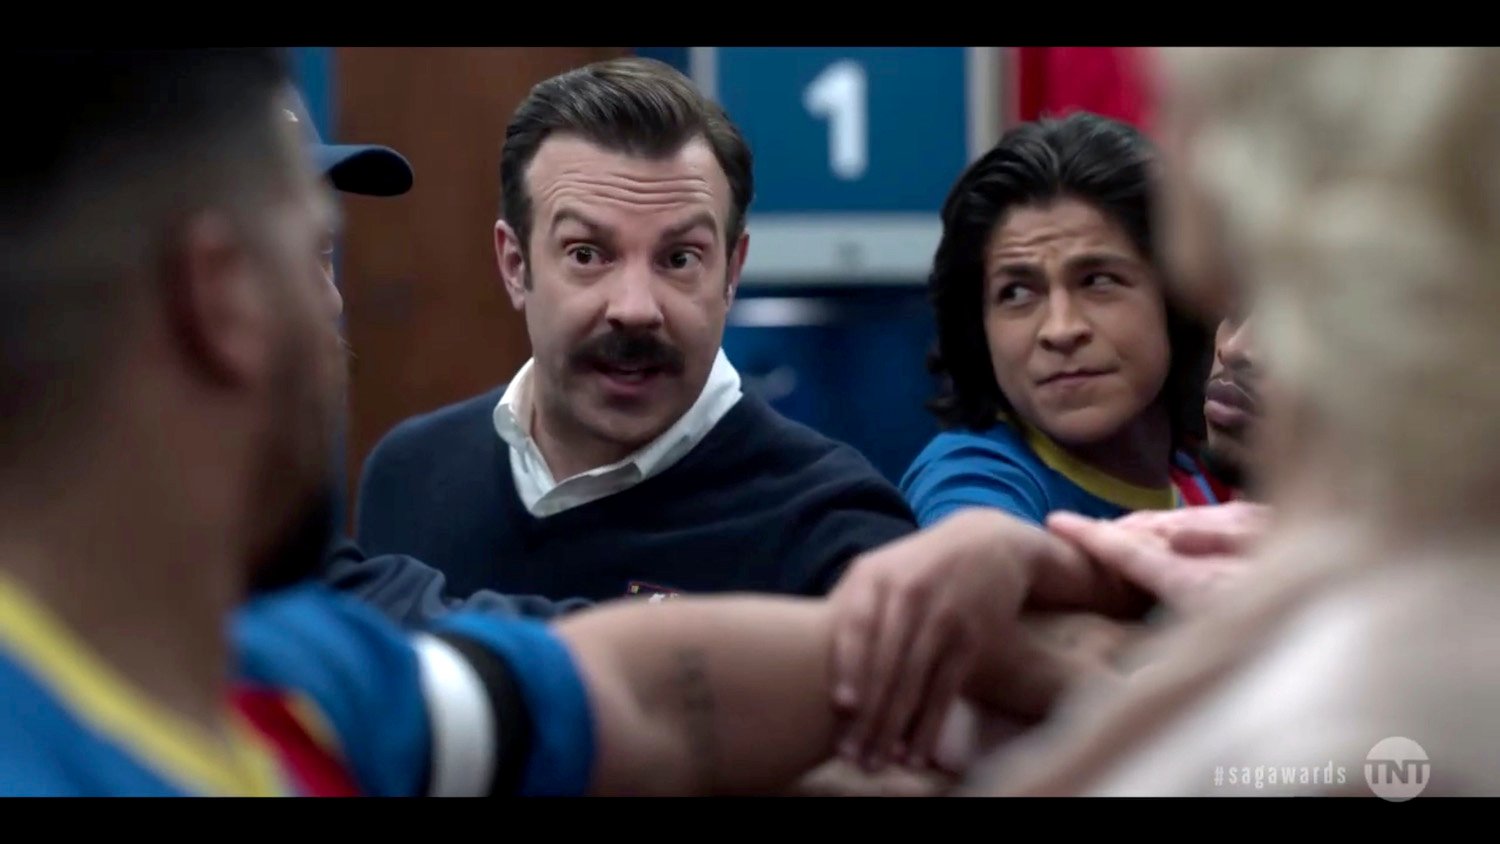 Jason Sudeikis and cast perform as characters in 'Ted Lasso'